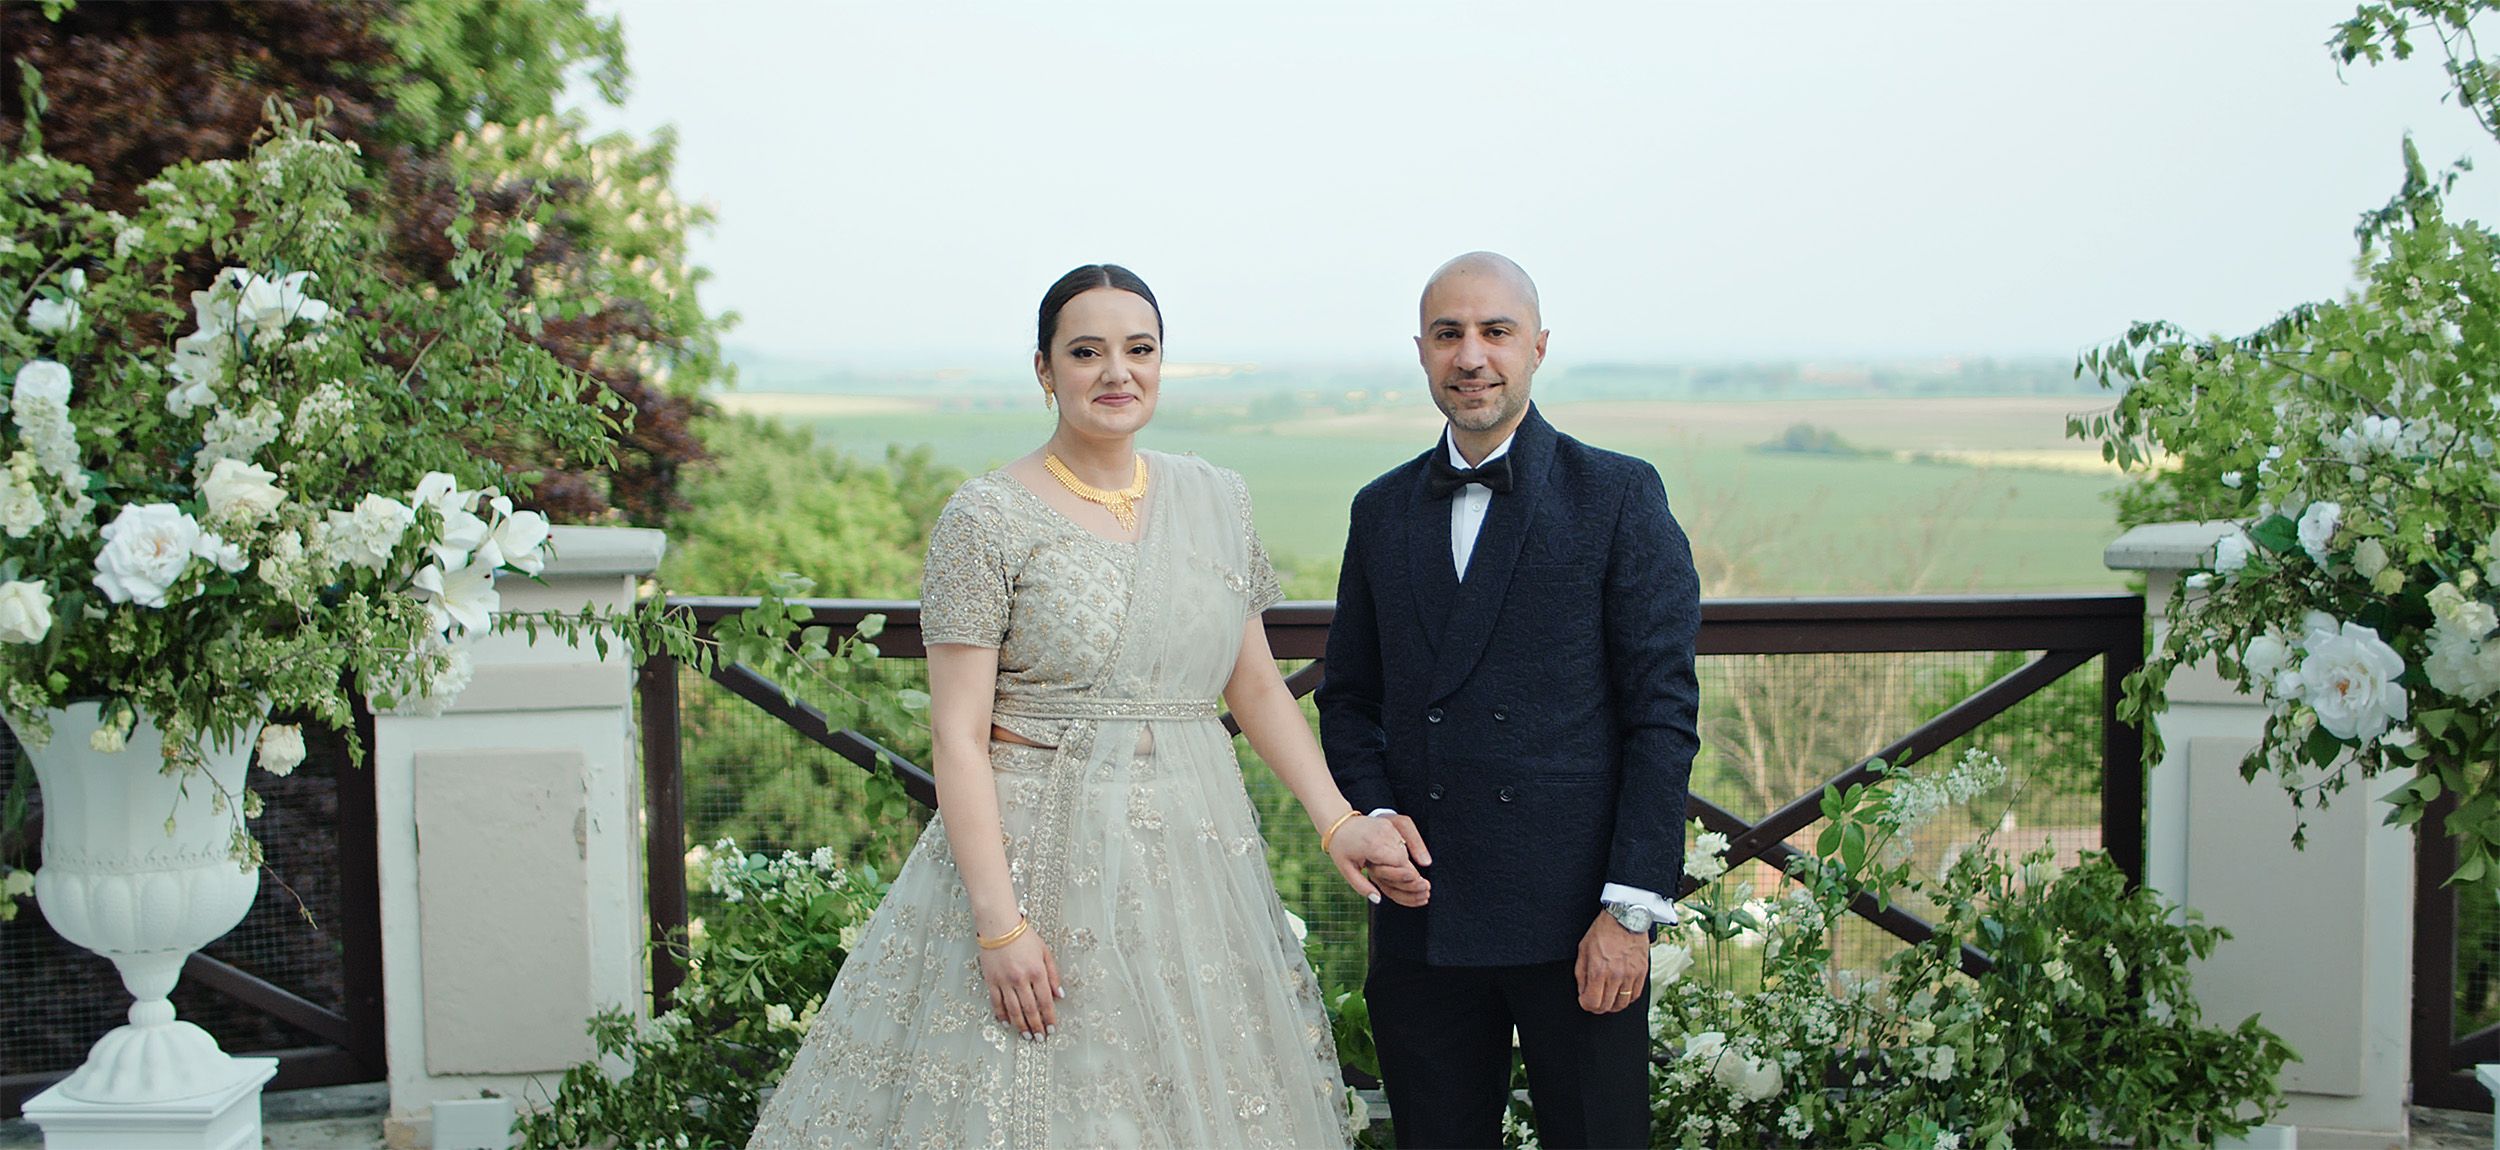 An Indian Wedding: Rebbeca and Omar united two hearts in a magical atmosphere